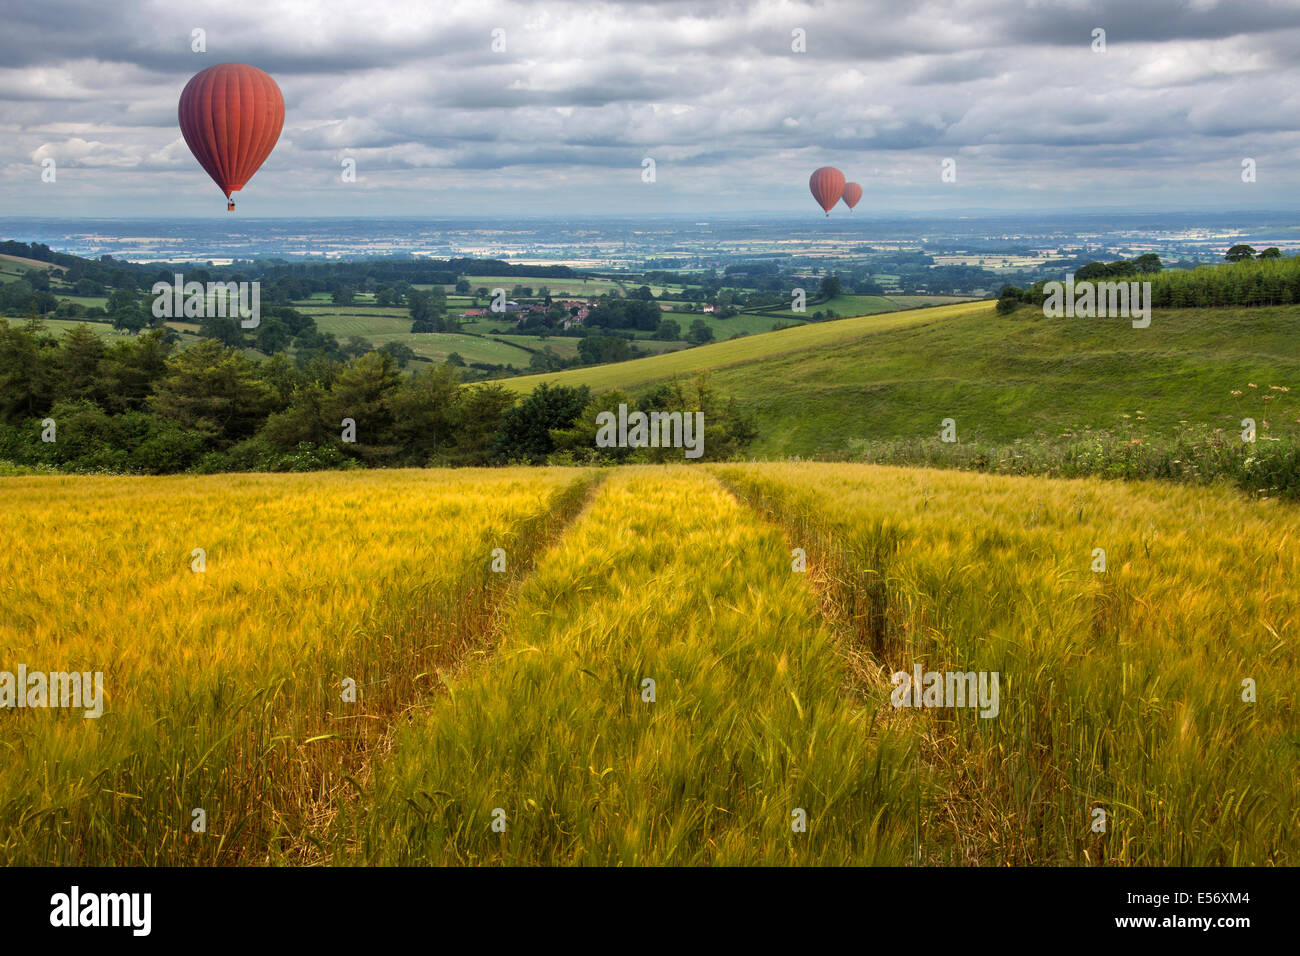 Hot air balloons drifting over fields and meadows of the East Yorkshire Wolds in the United Kingdom Stock Photo